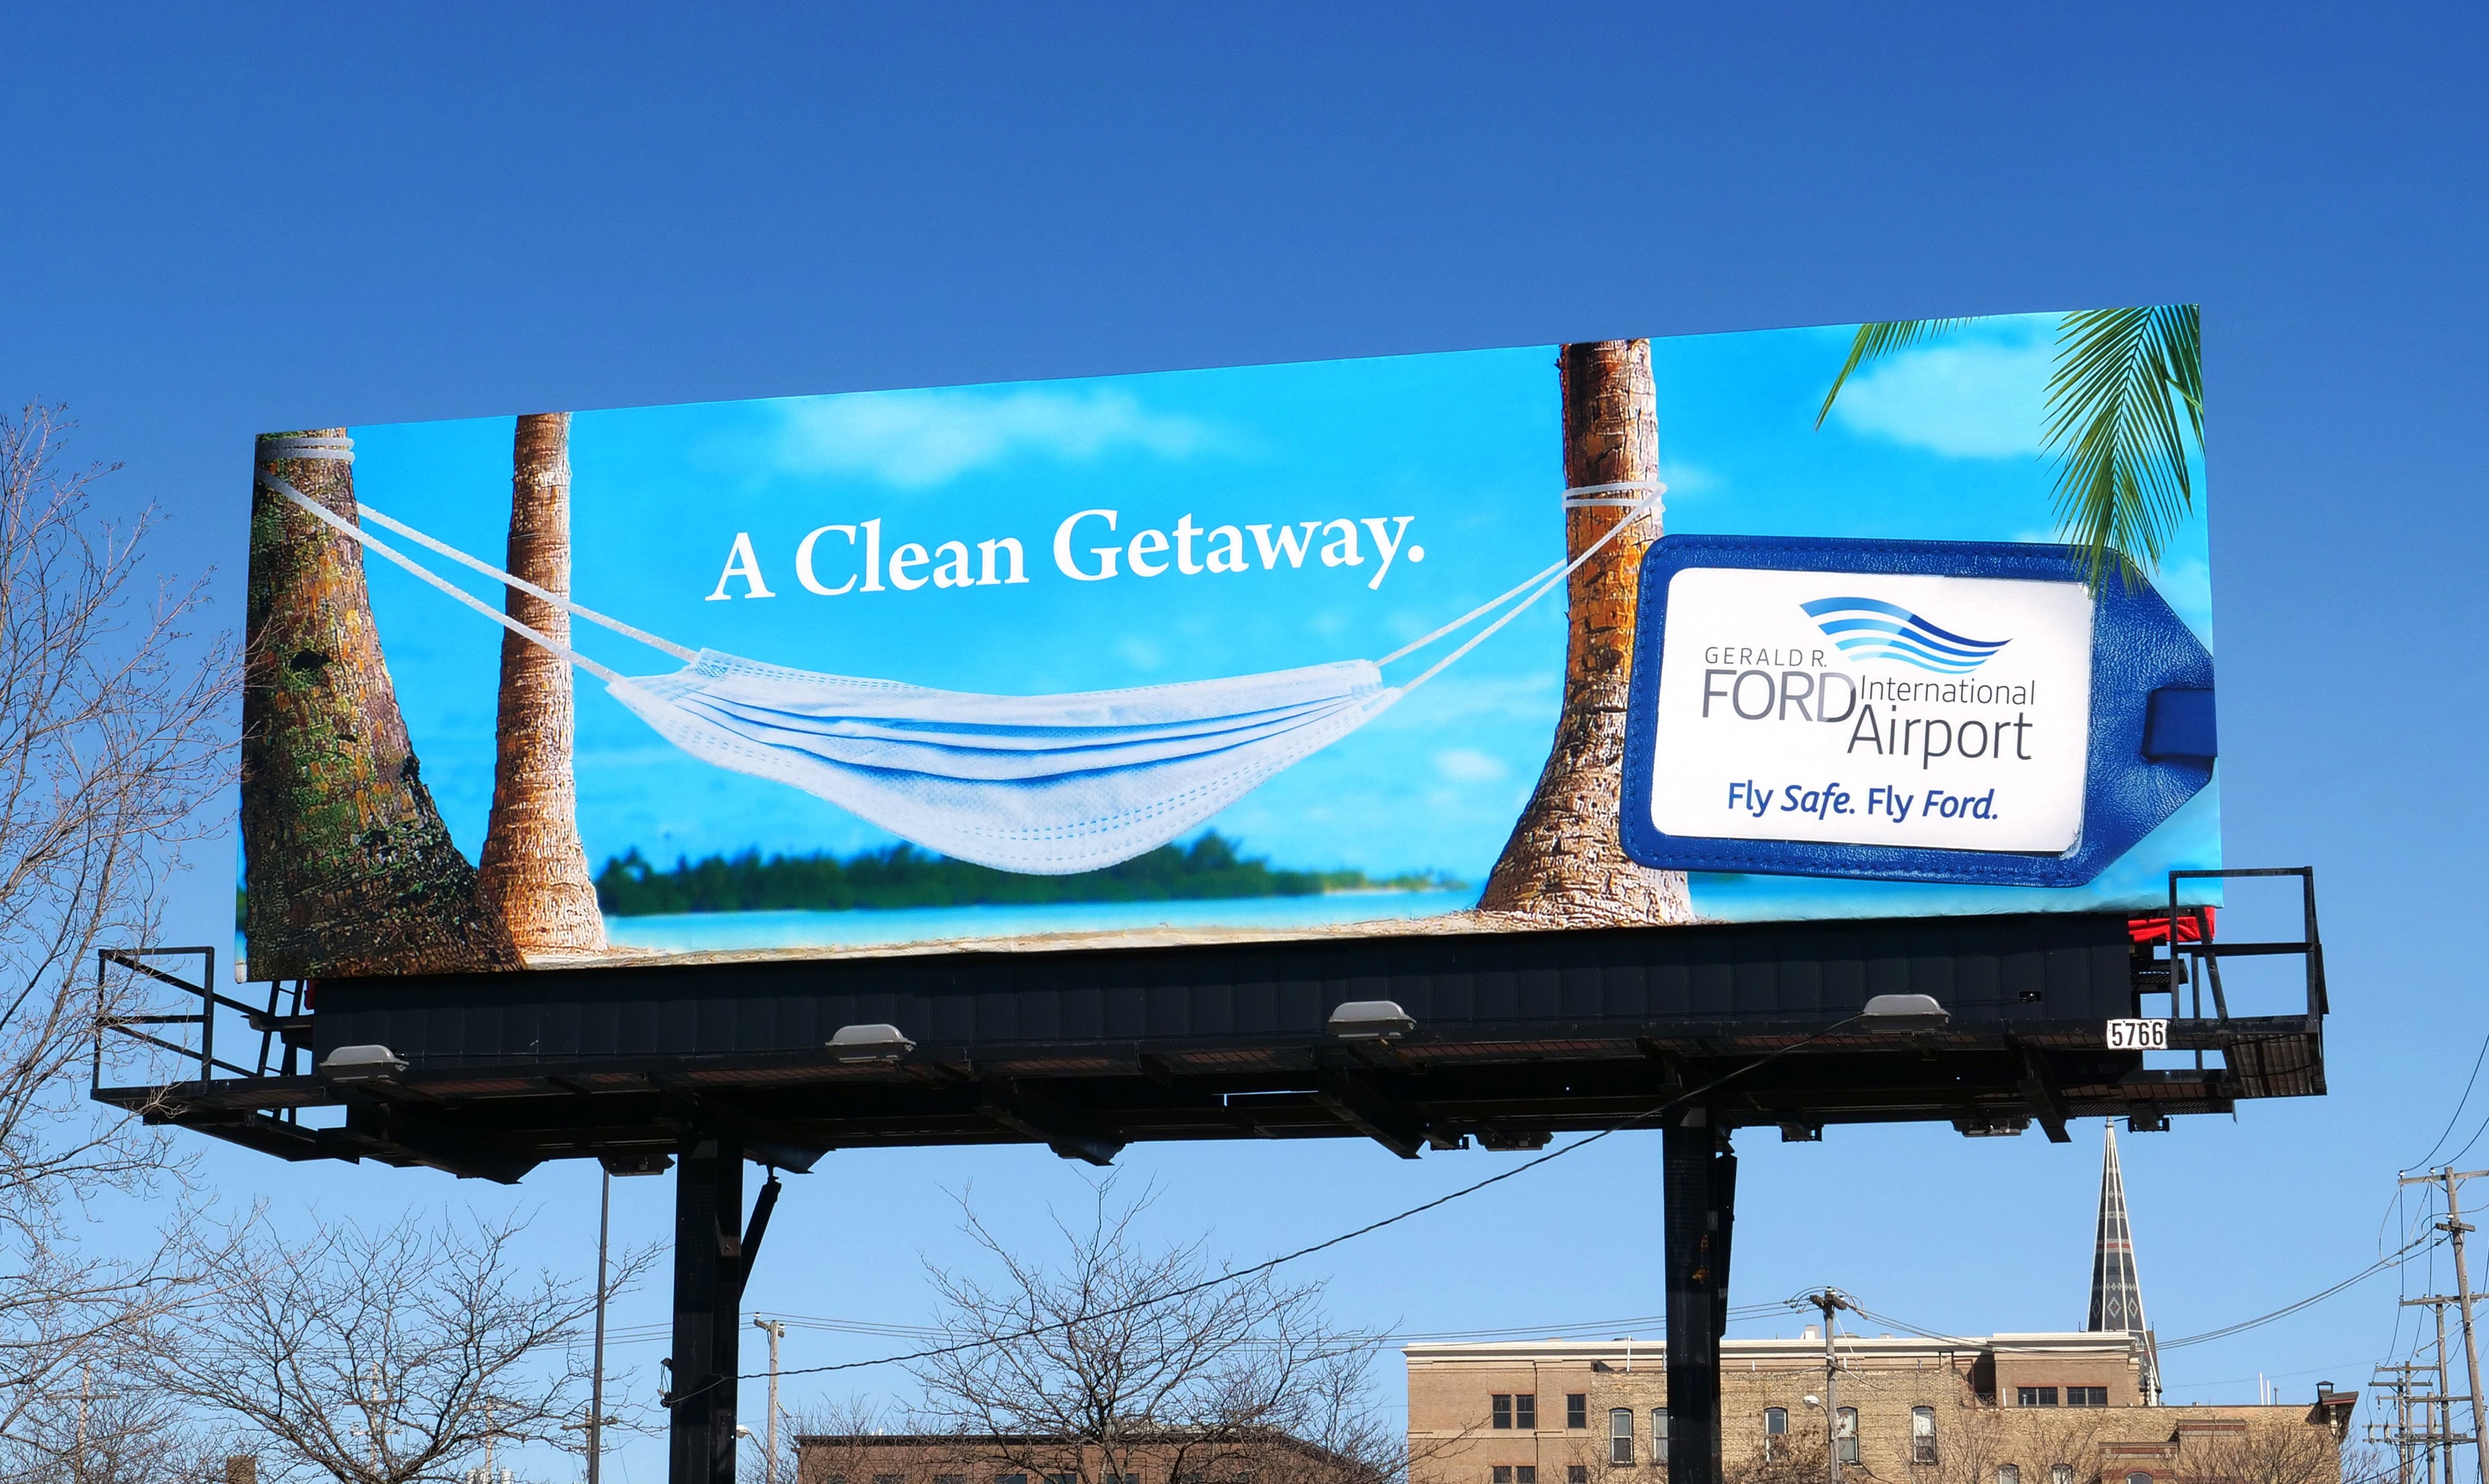 Ford International Airport Sweeps West Michigan Advertising Awards, Winning Judge’s Choice and Best in Show